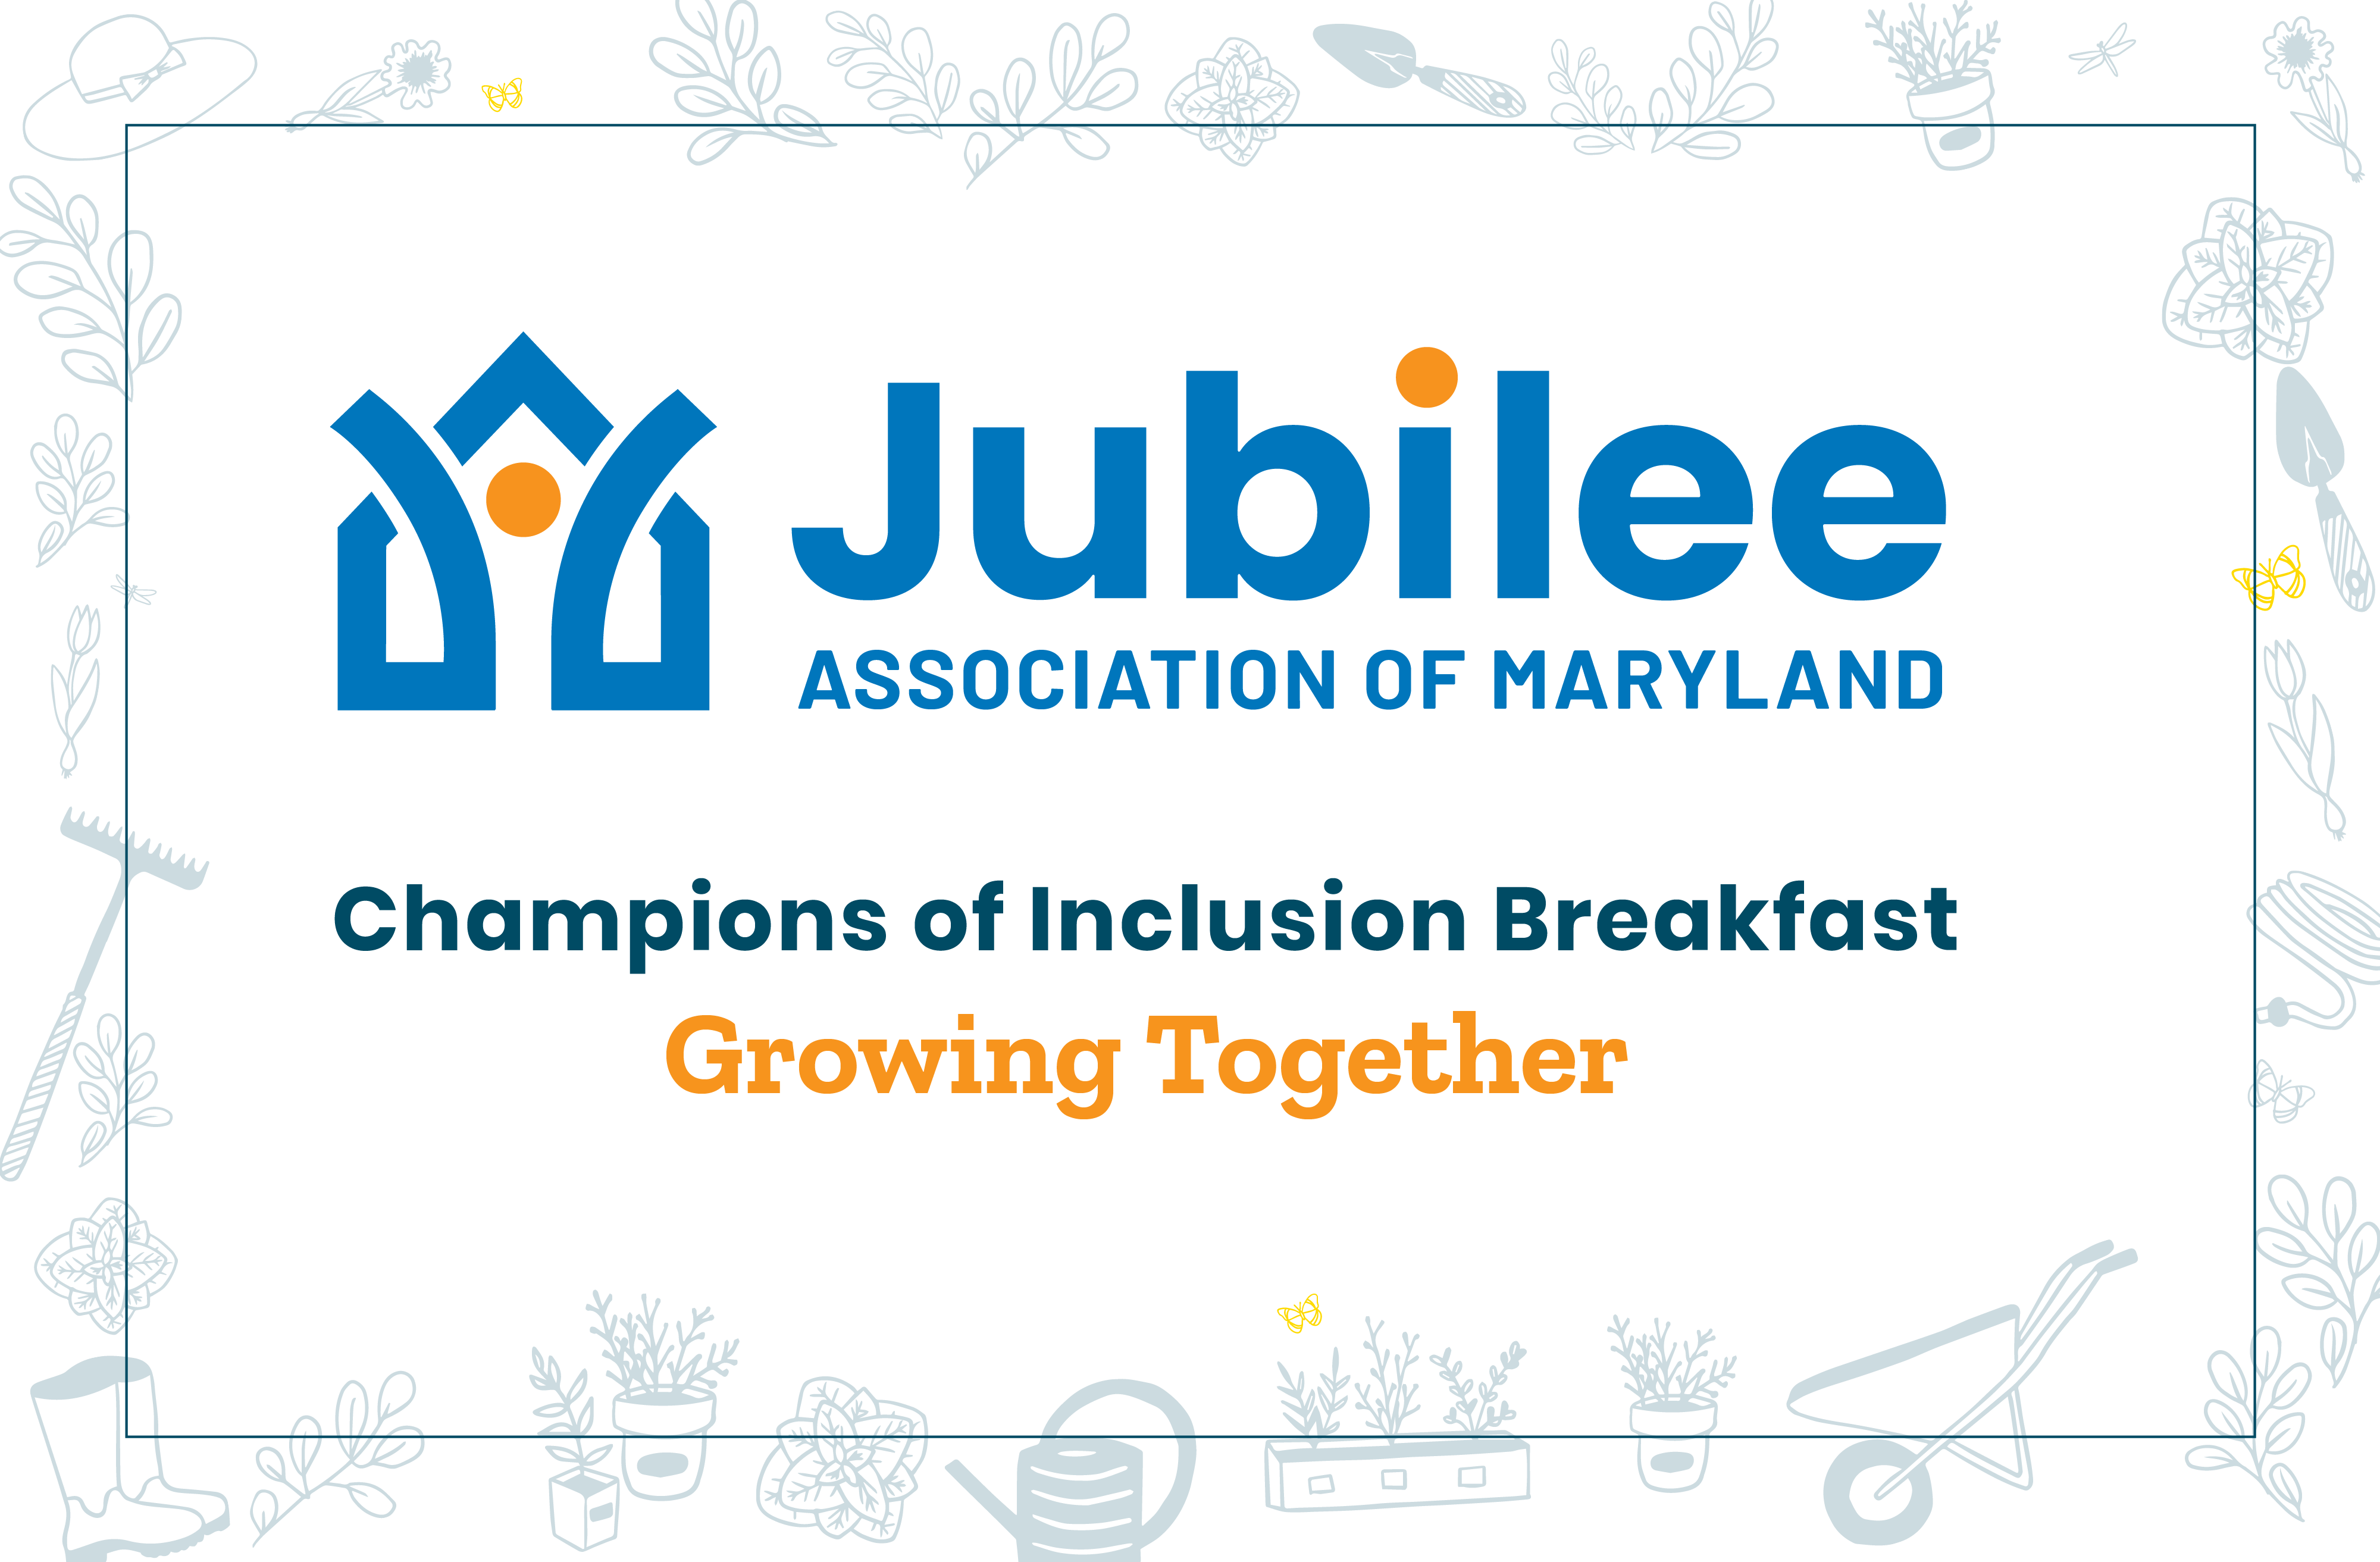 White card with text: Jubilee Champions of Inclusion Breakfast Growing Together